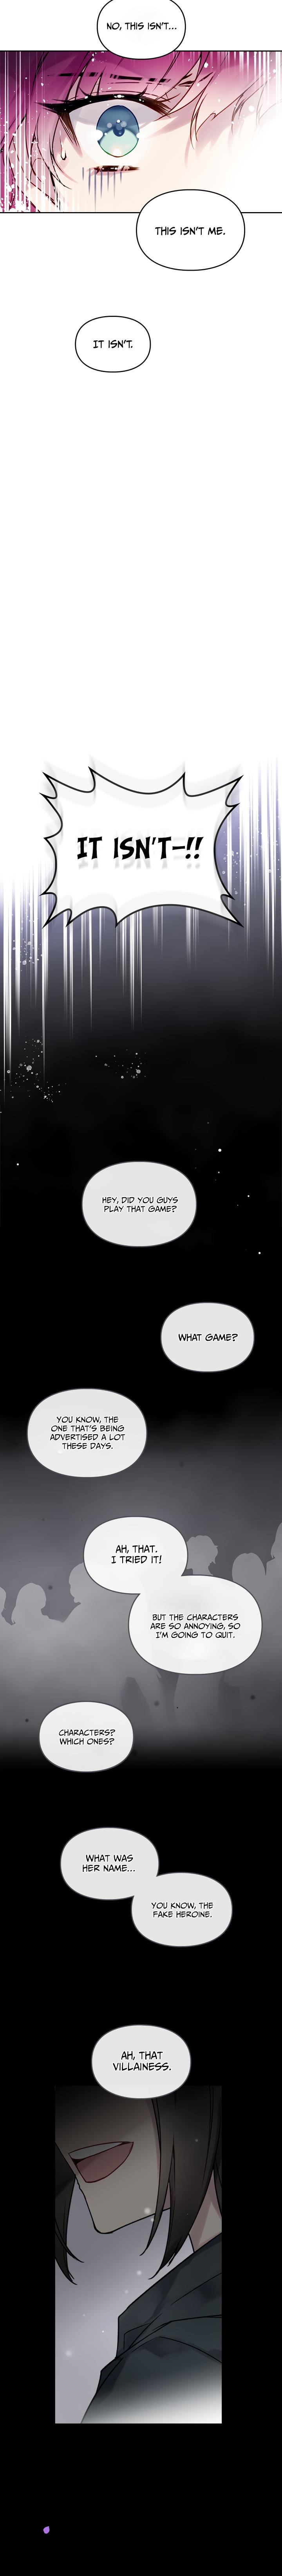 Villains Are Destined To Die Chapter 0: Prologue page 11 - 